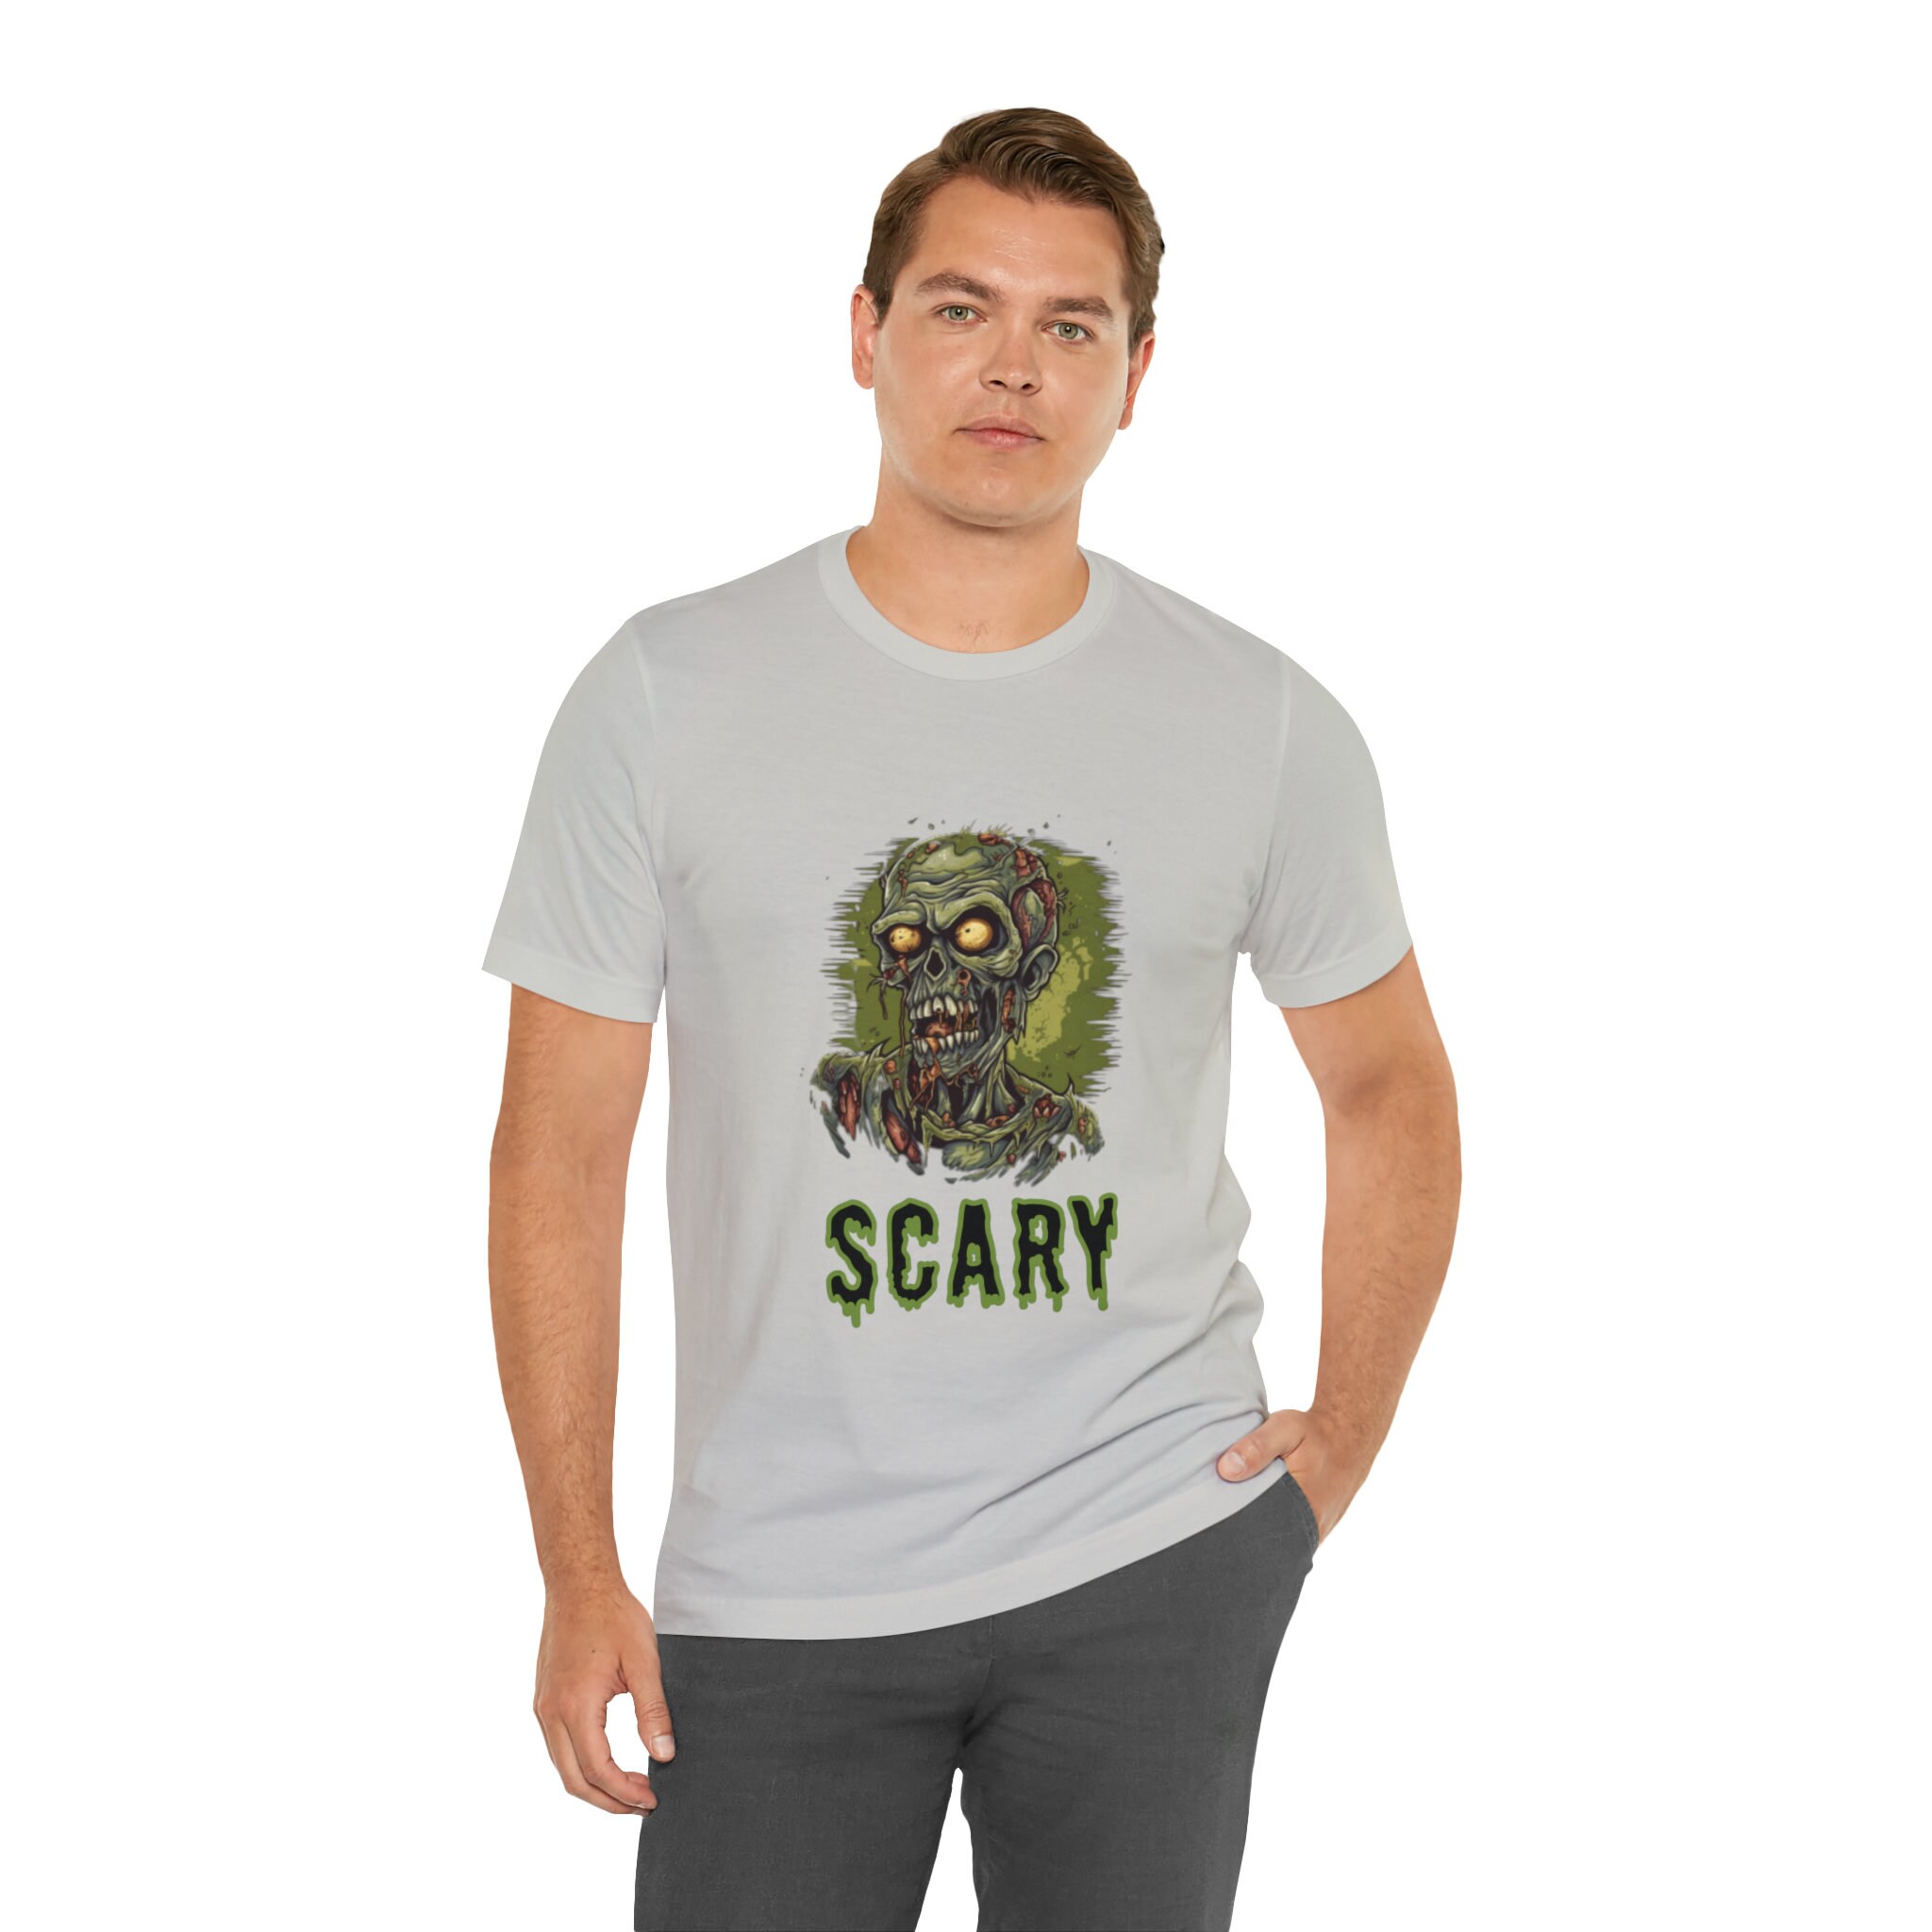 Discover Zombie Apocalypse Mens T-shirt,Halloween,Horror,geek,geeky shirt,Dead Shirt,scary t shirt,gift,Comic,Zombie Gift,Trick Or Treat Shirt,spooky